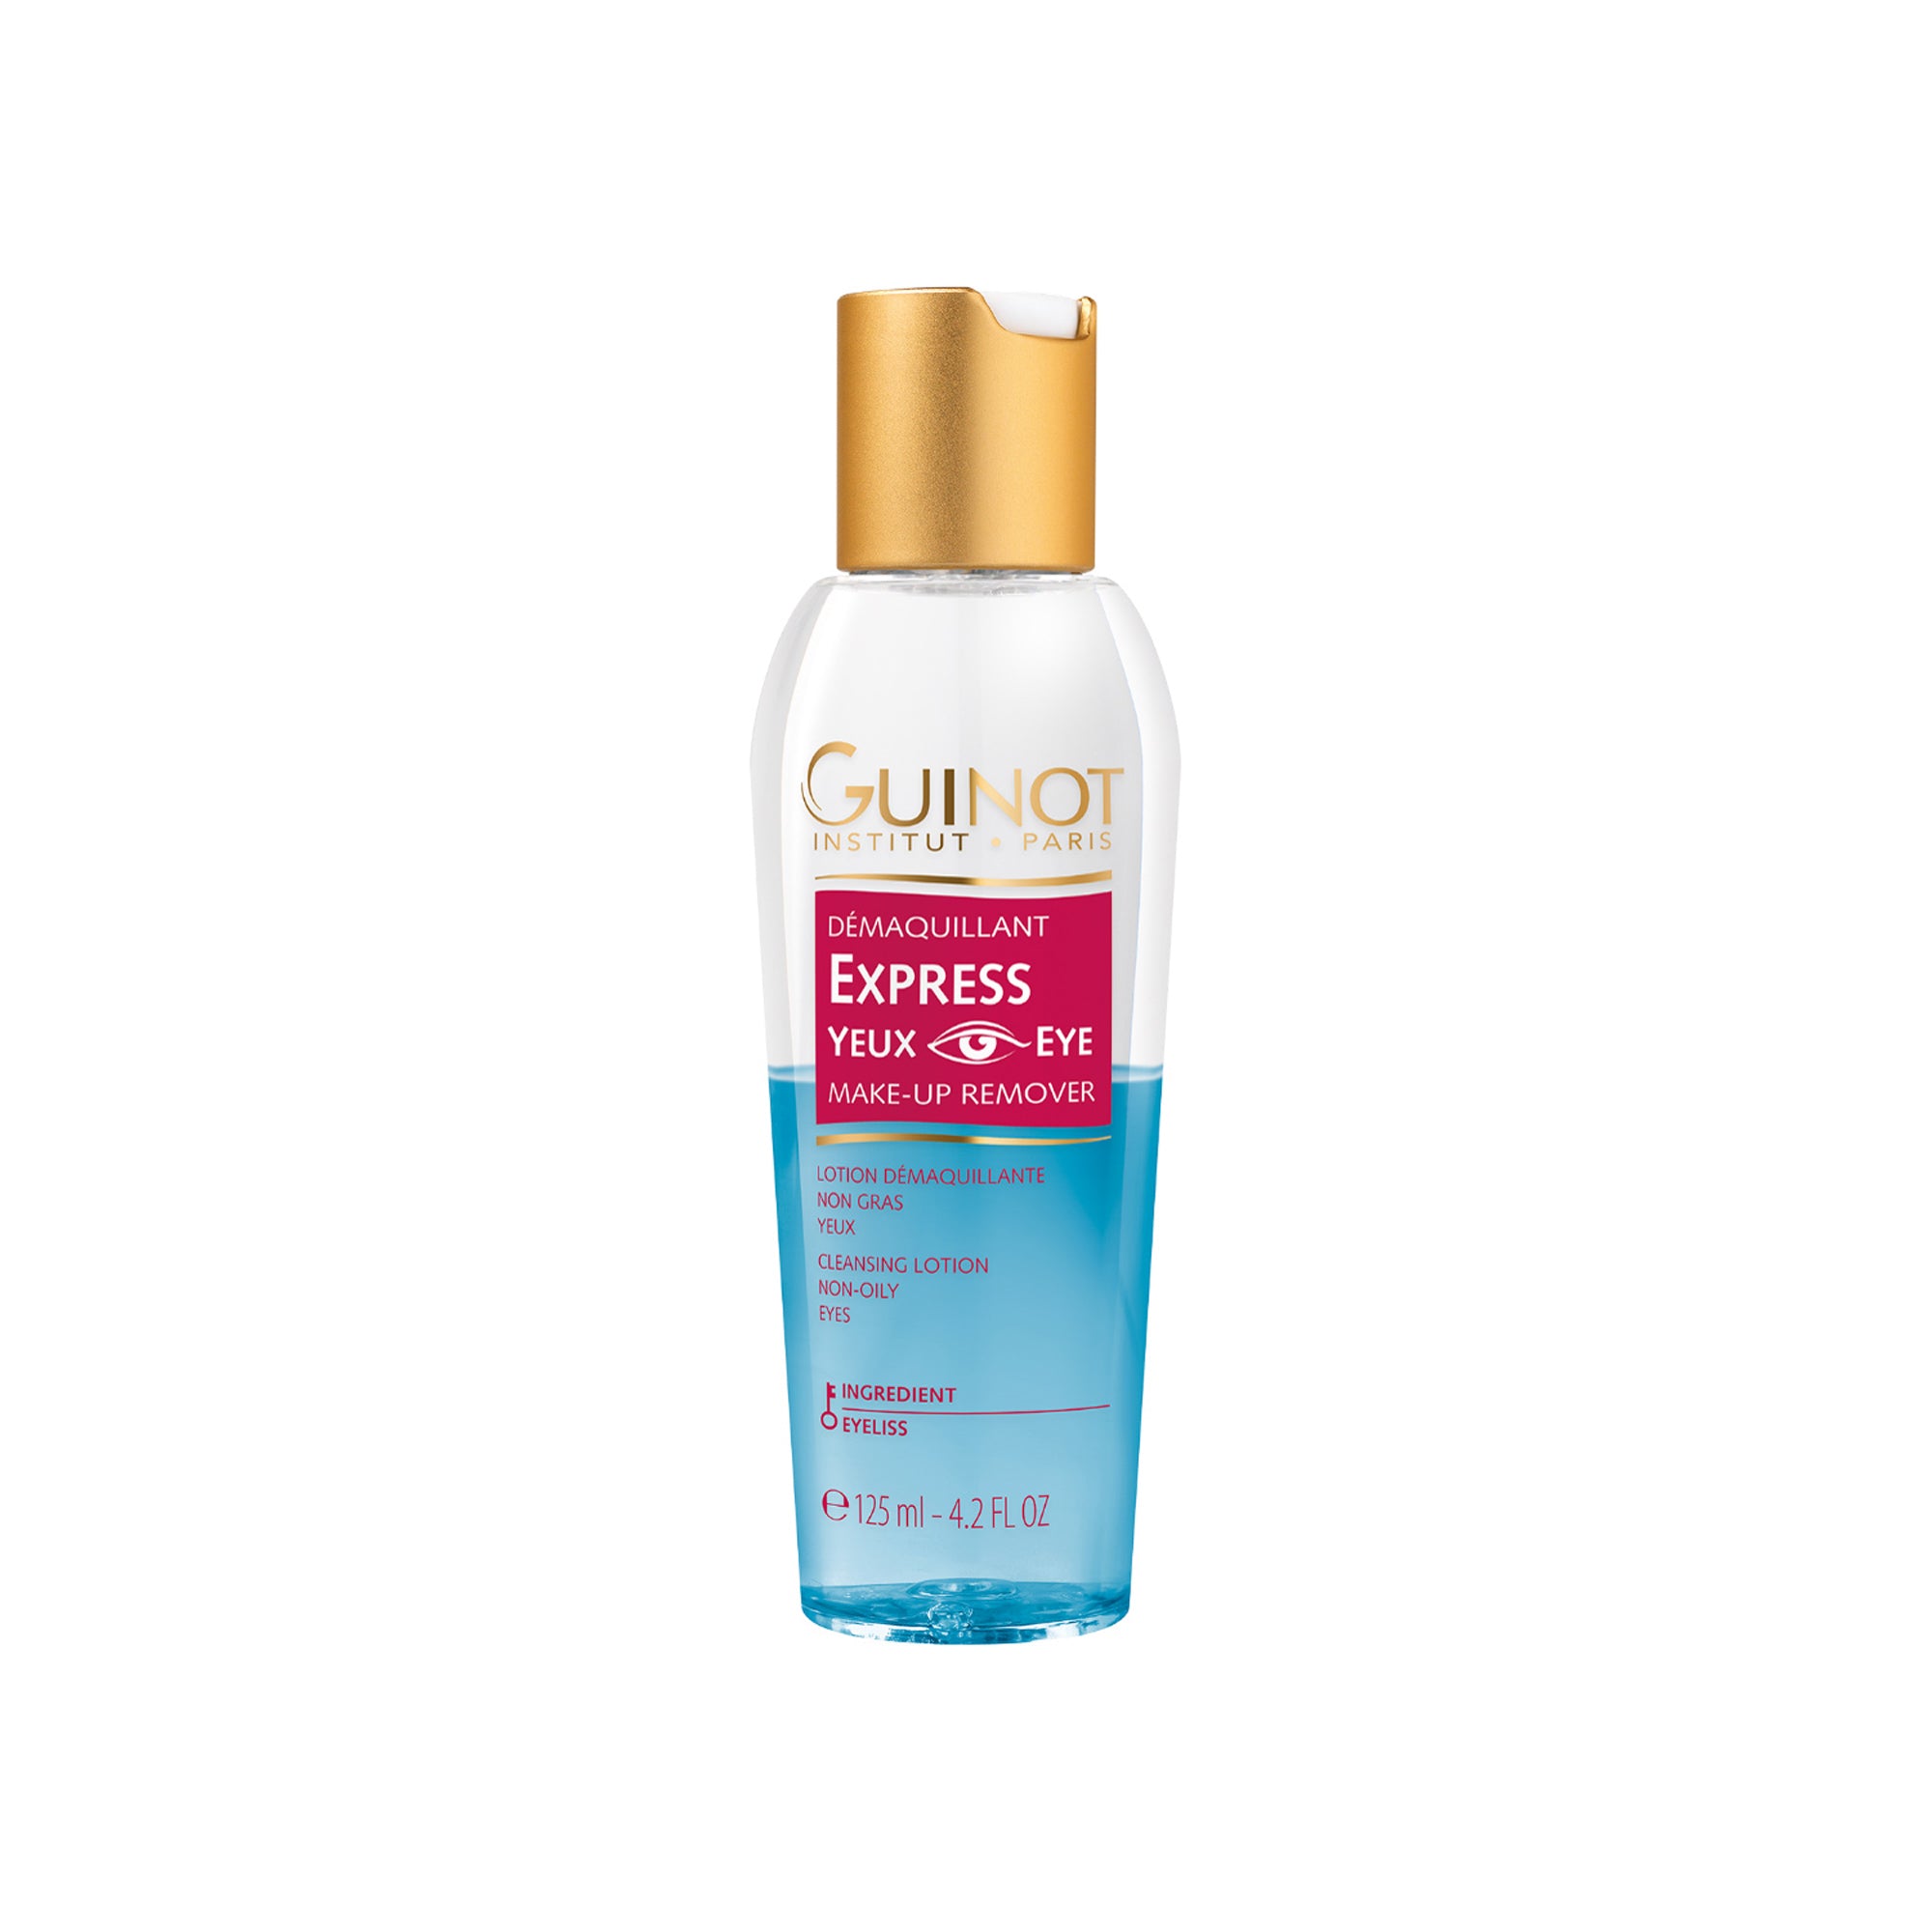 Démaquillant Express Yeux (Eye Make-up Remover) - Guinot